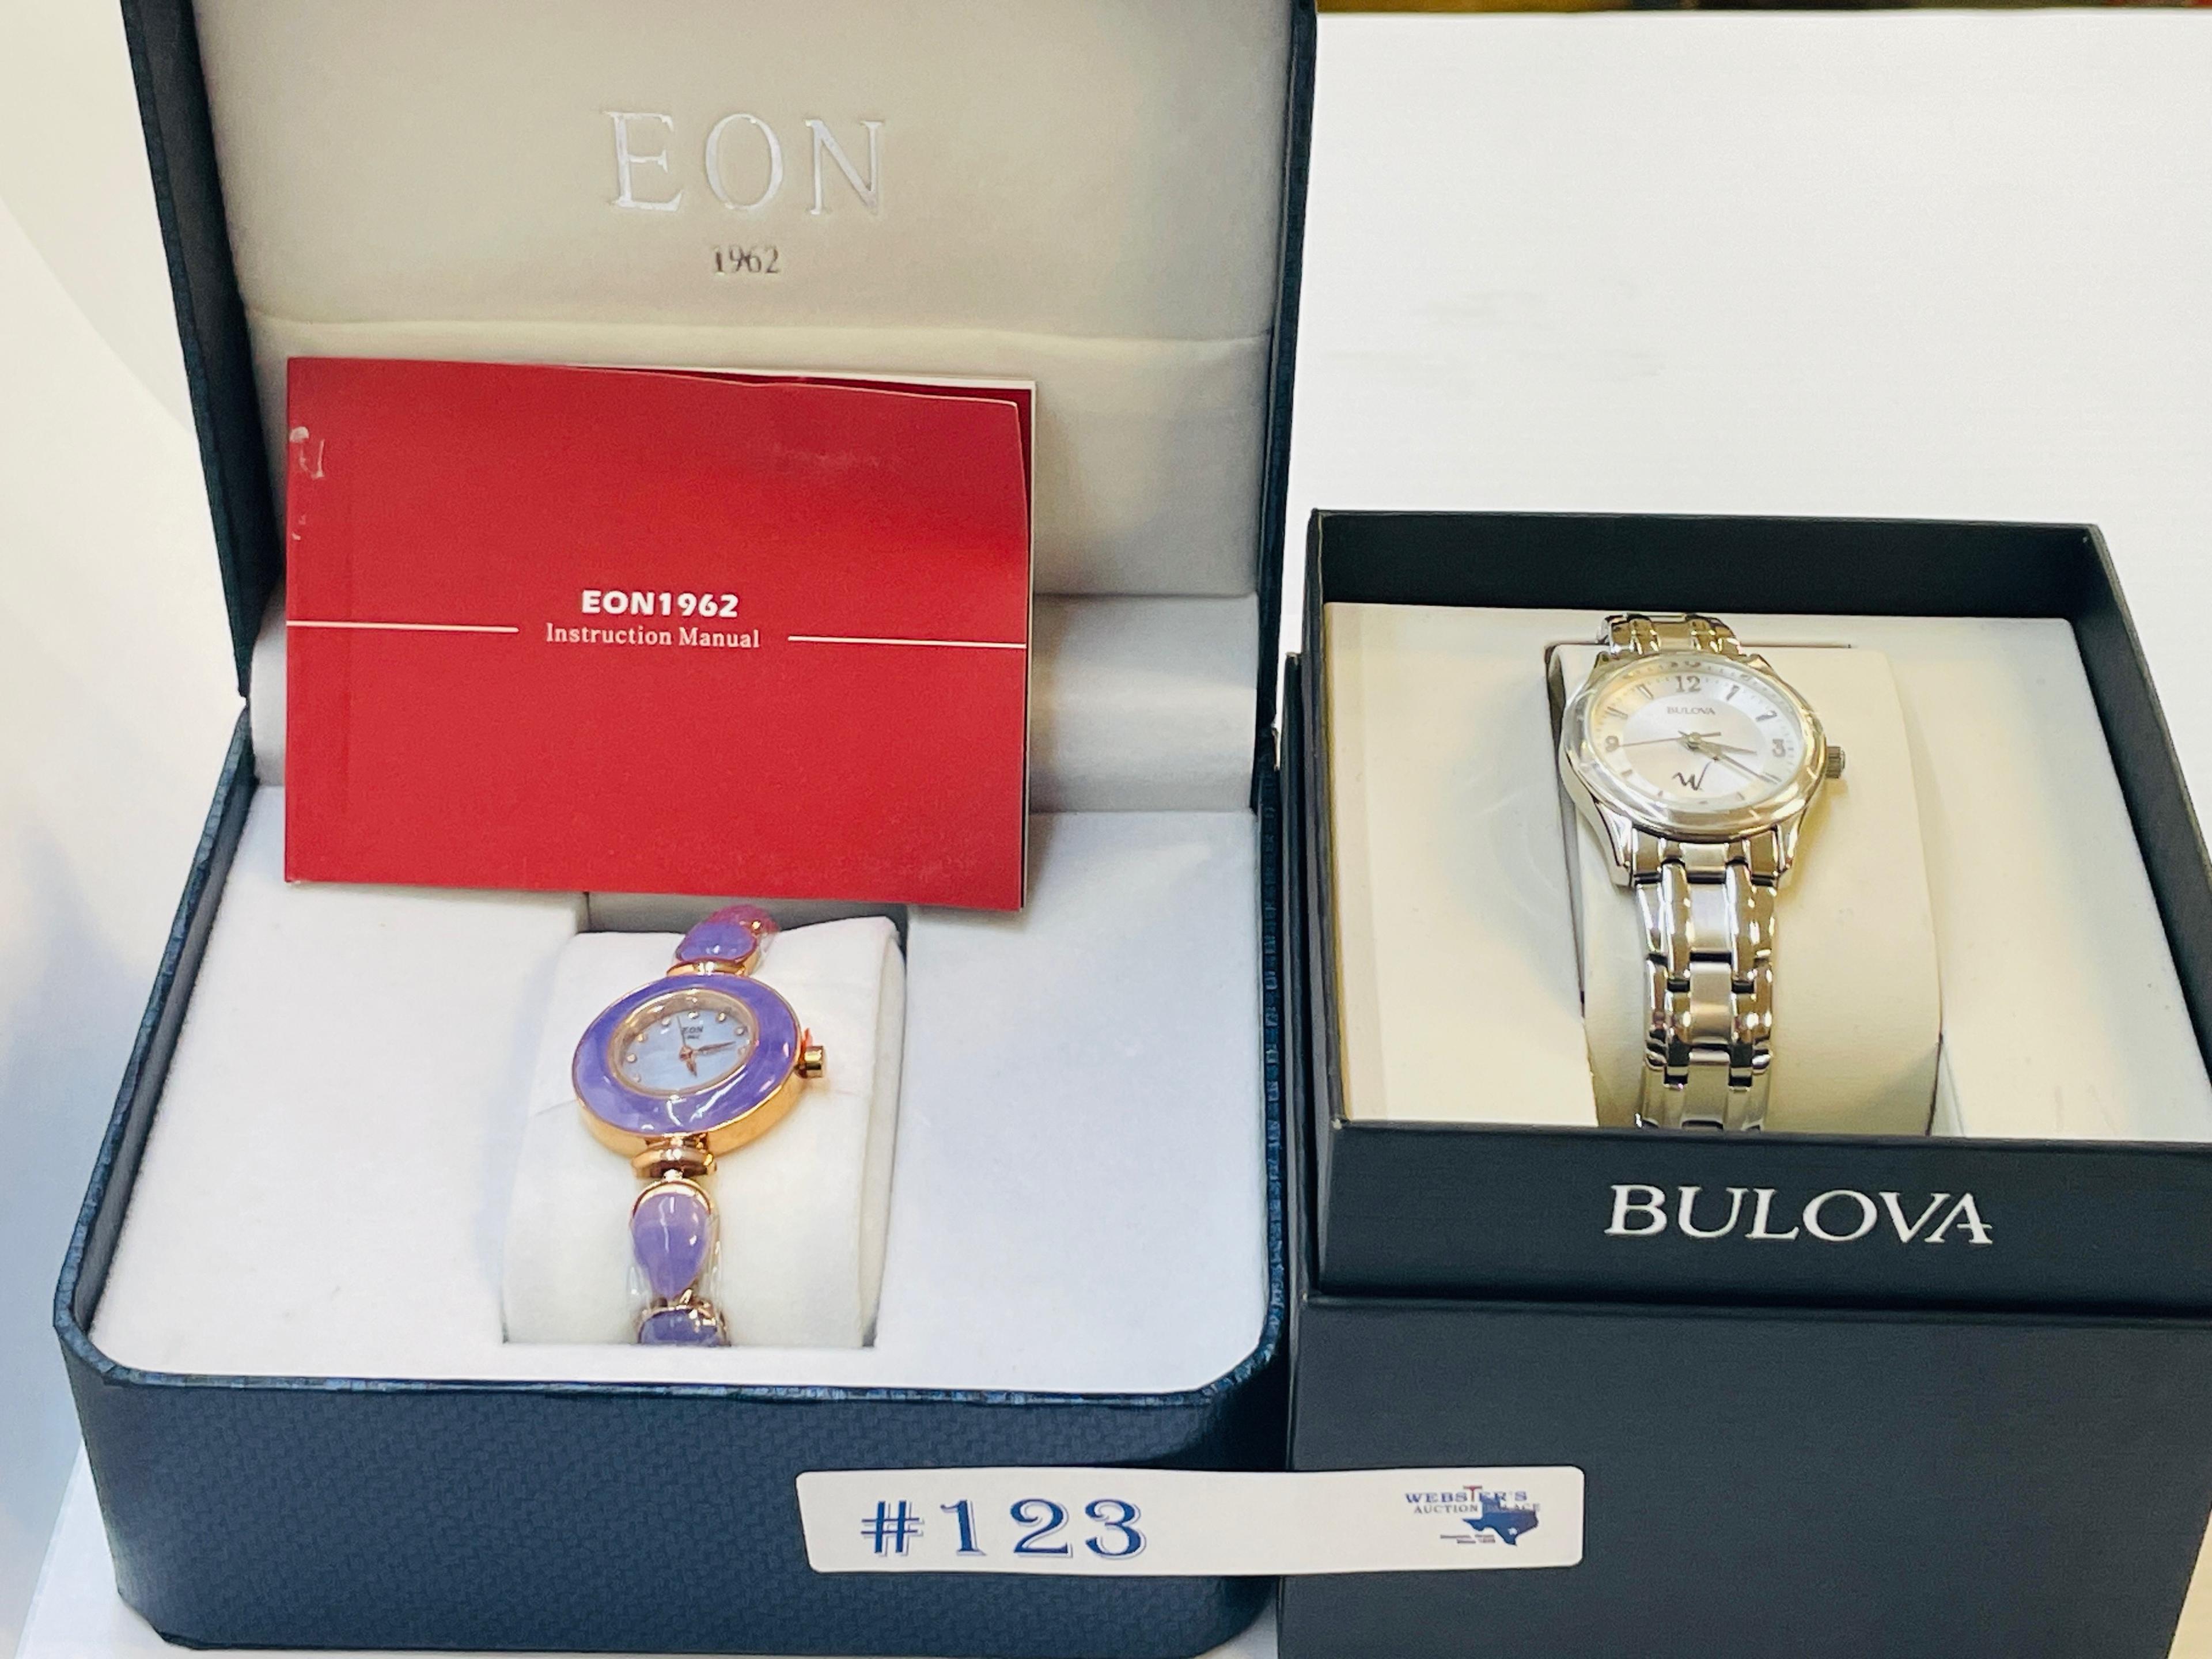 2PC BULOVA AND EON 1962 WATCHES IN BOXES